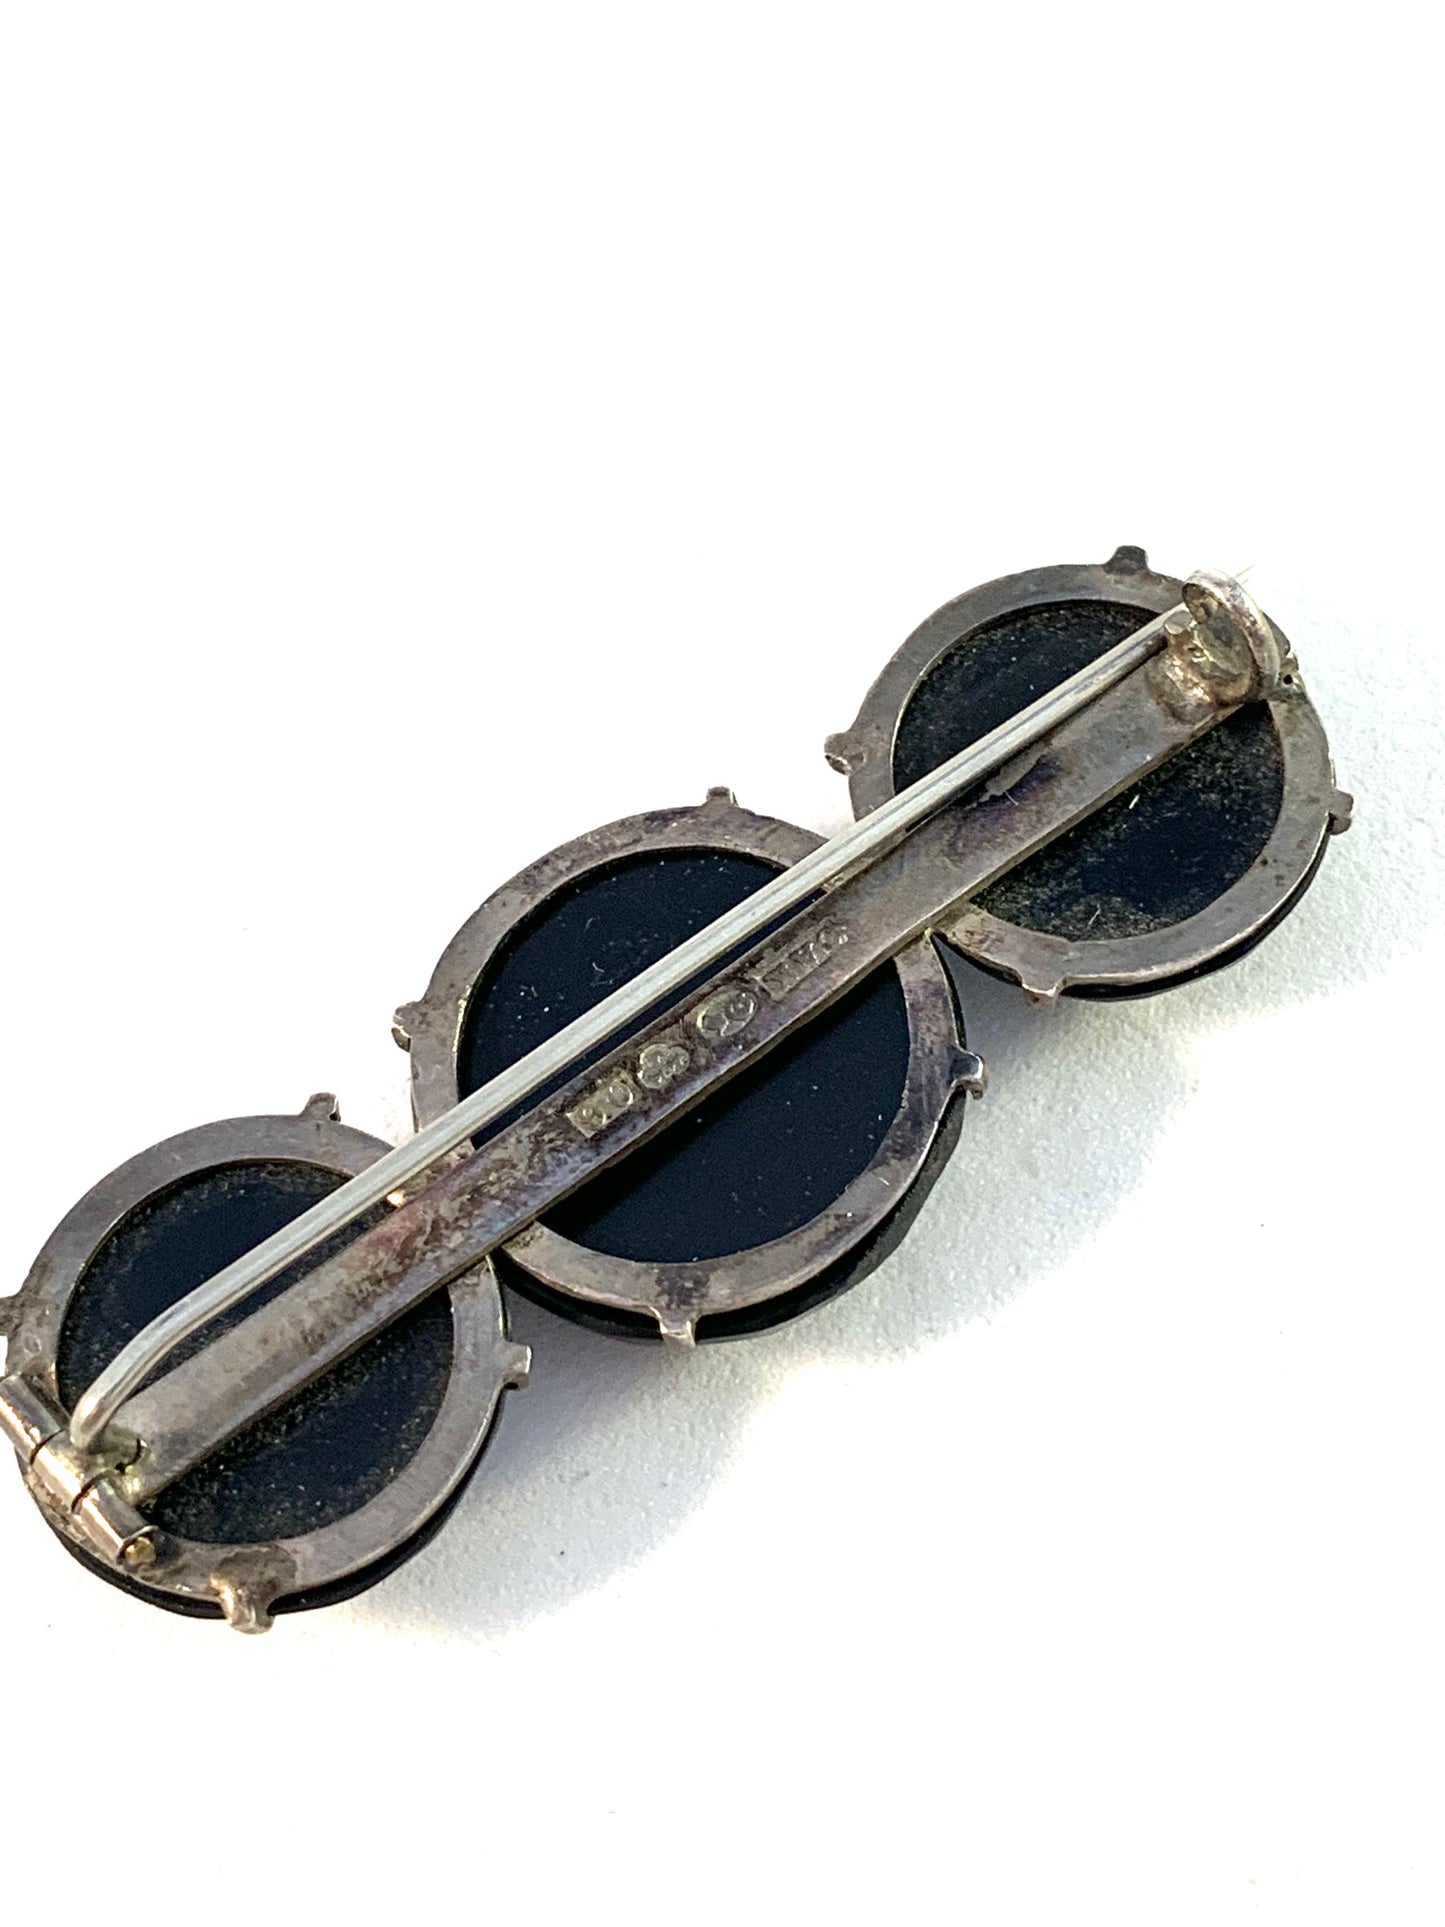 CAK, Gothenburg 1892 Victorian Solid Silver French Jet Mourning Brooch.